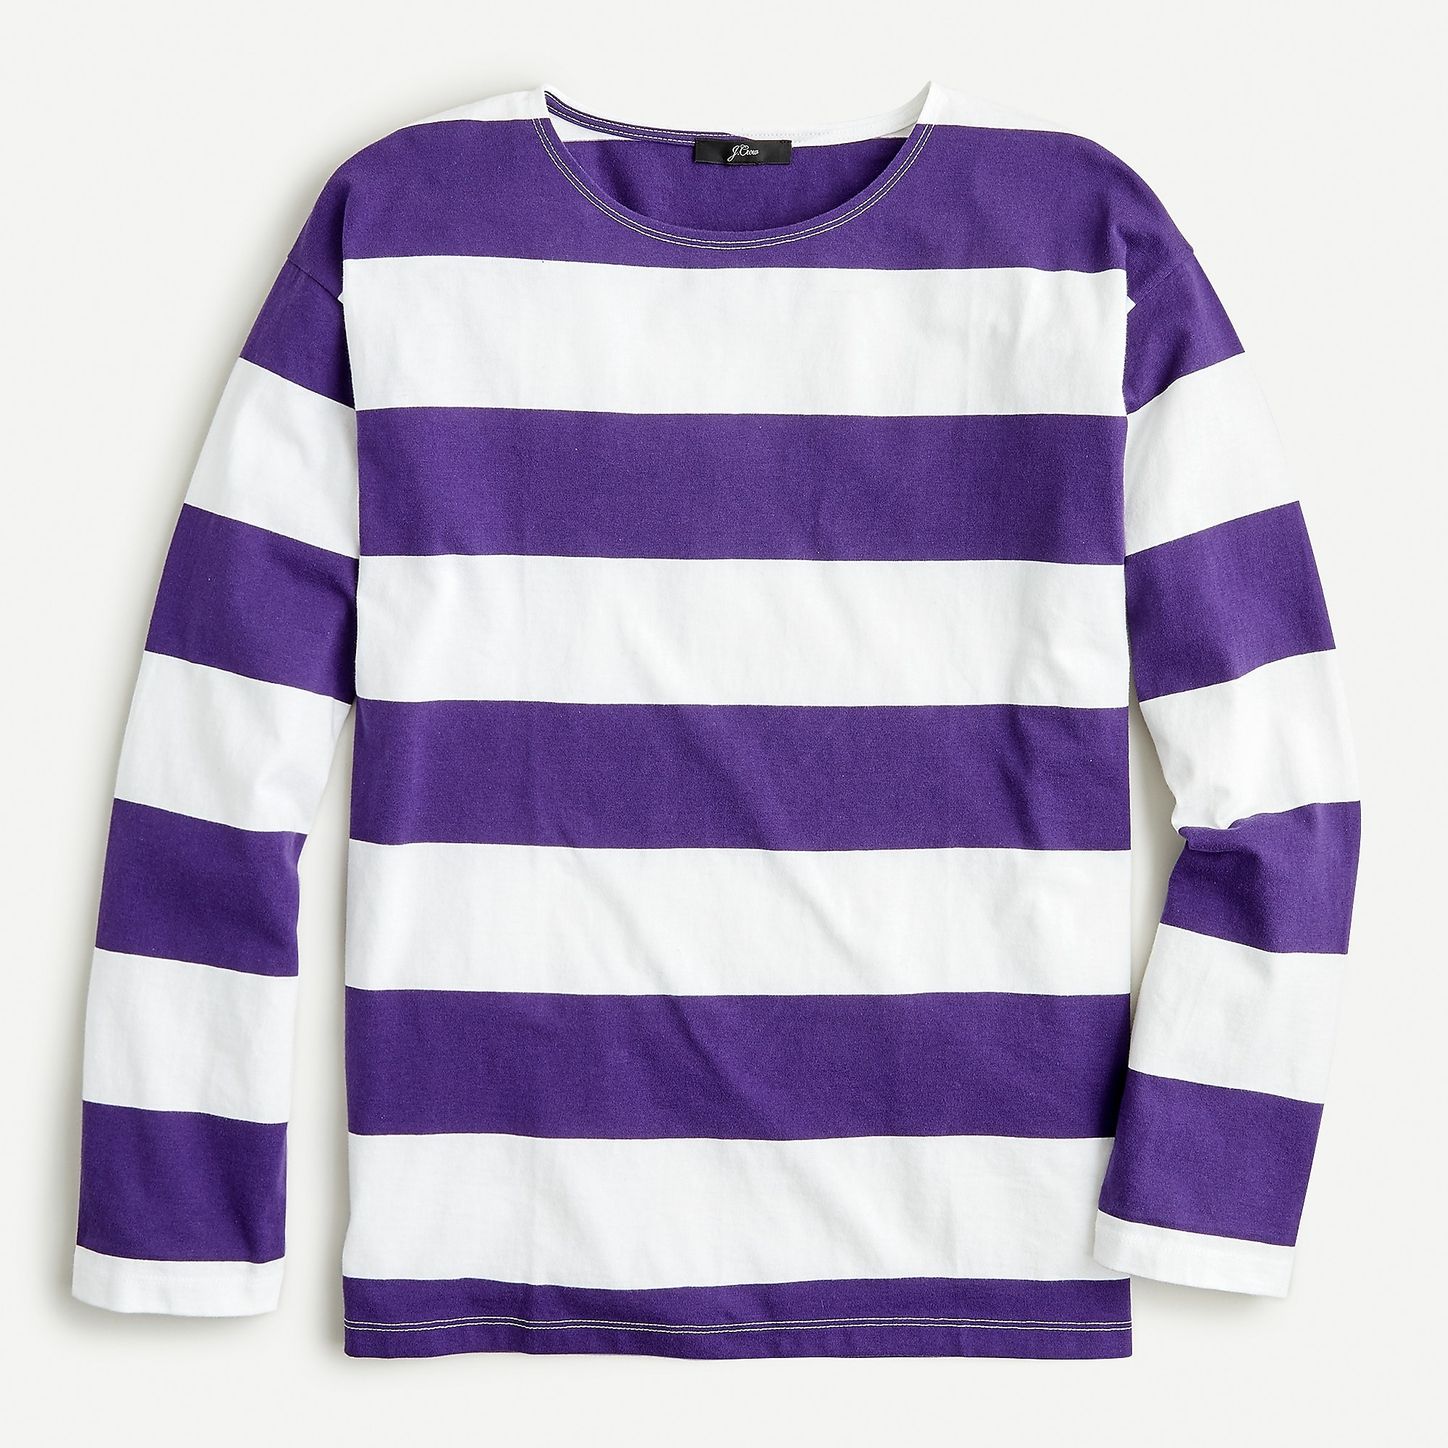 29 Best Striped Tees 2020 | The Strategist